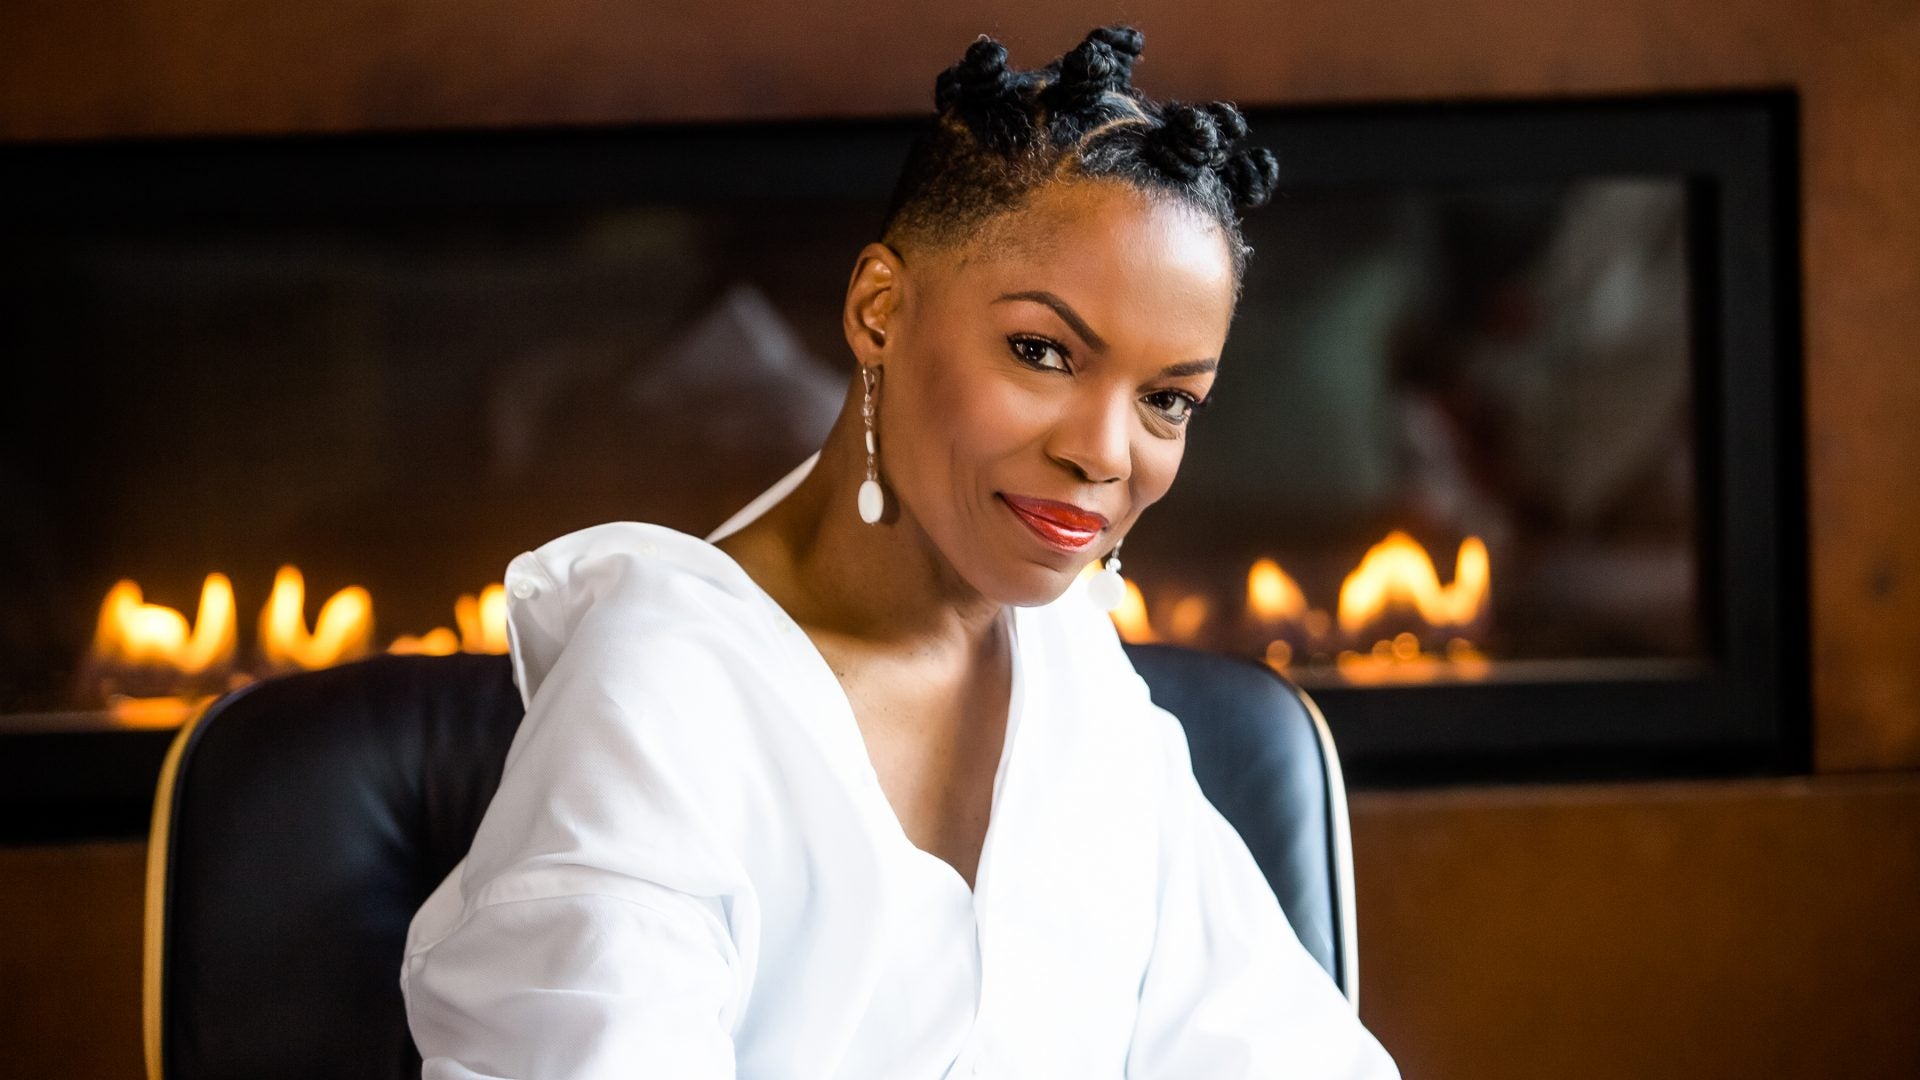 After Losing Her Husband And Sister, Jazz Singer Nnenna Freelon Chronicles Loss In 'Great Grief' Podcast, New Album